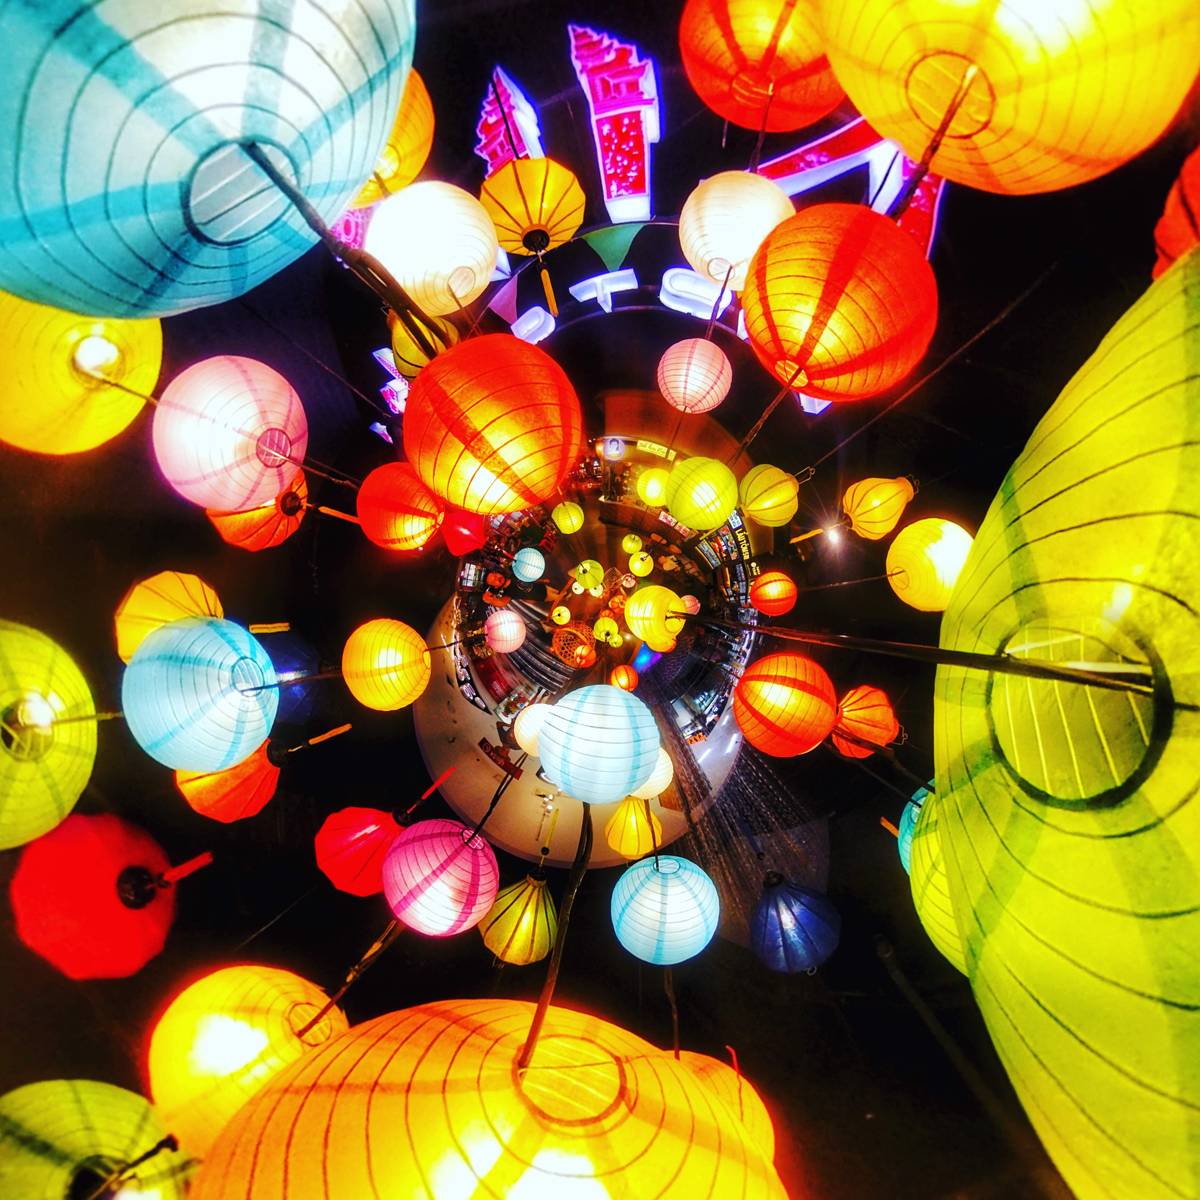 360-degree photo of a paper lamp installation at Asiana Food Court